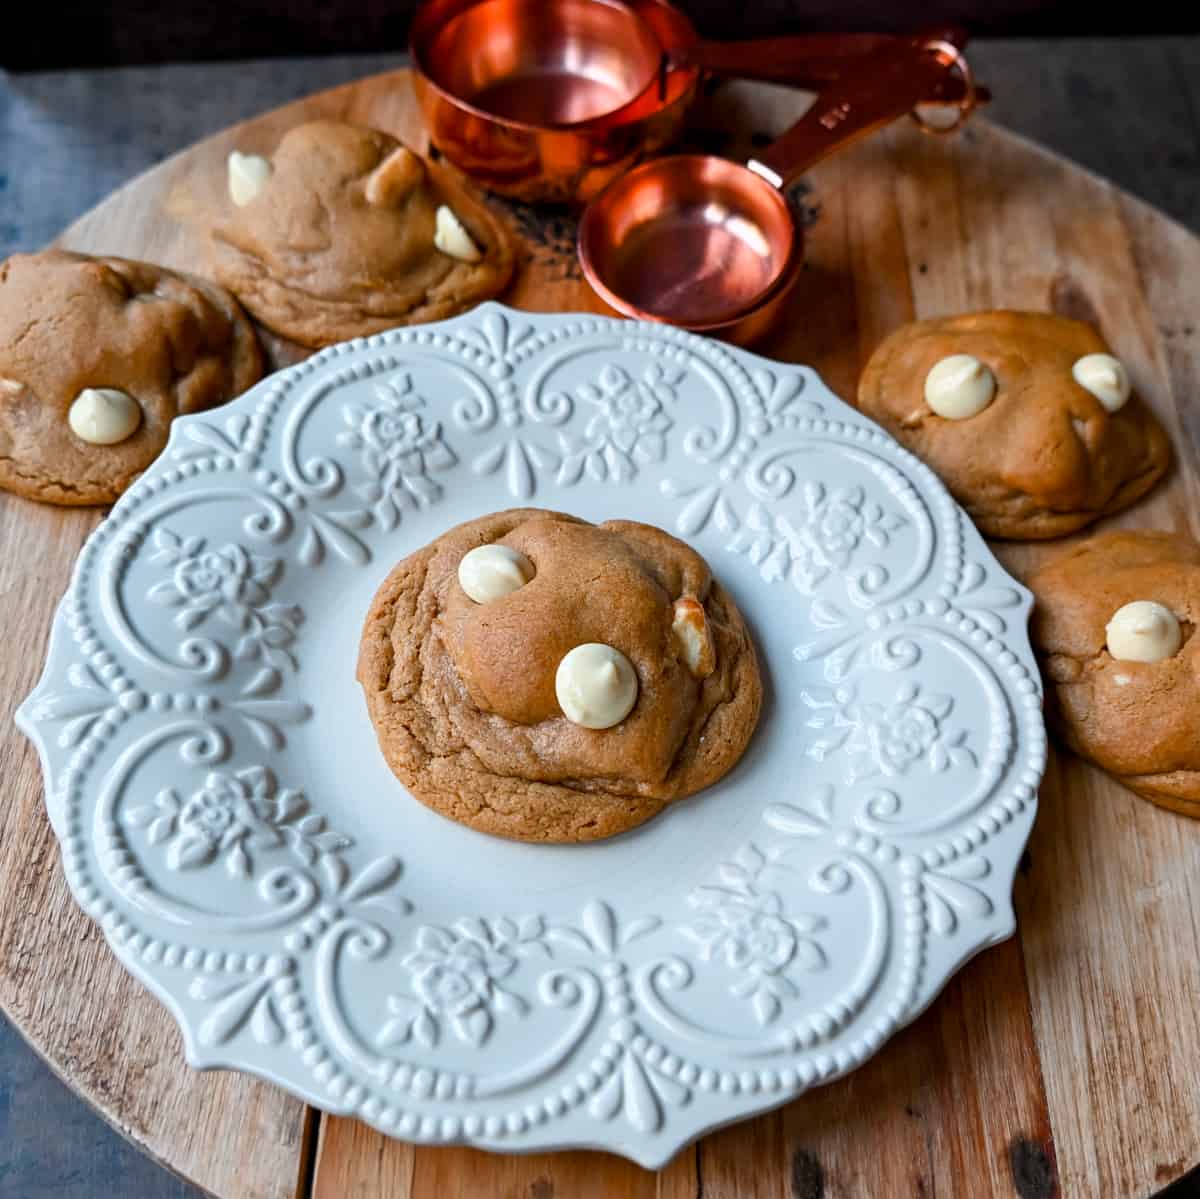 Spice White Chocolate Cookies. This Fall warm spiced cookie with white chocolate chips just screams Fall flavors. The warm spiced cookie made with cinnamon, ginger, nutmeg, and cloves pairs perfectly with decadent white chocolate.